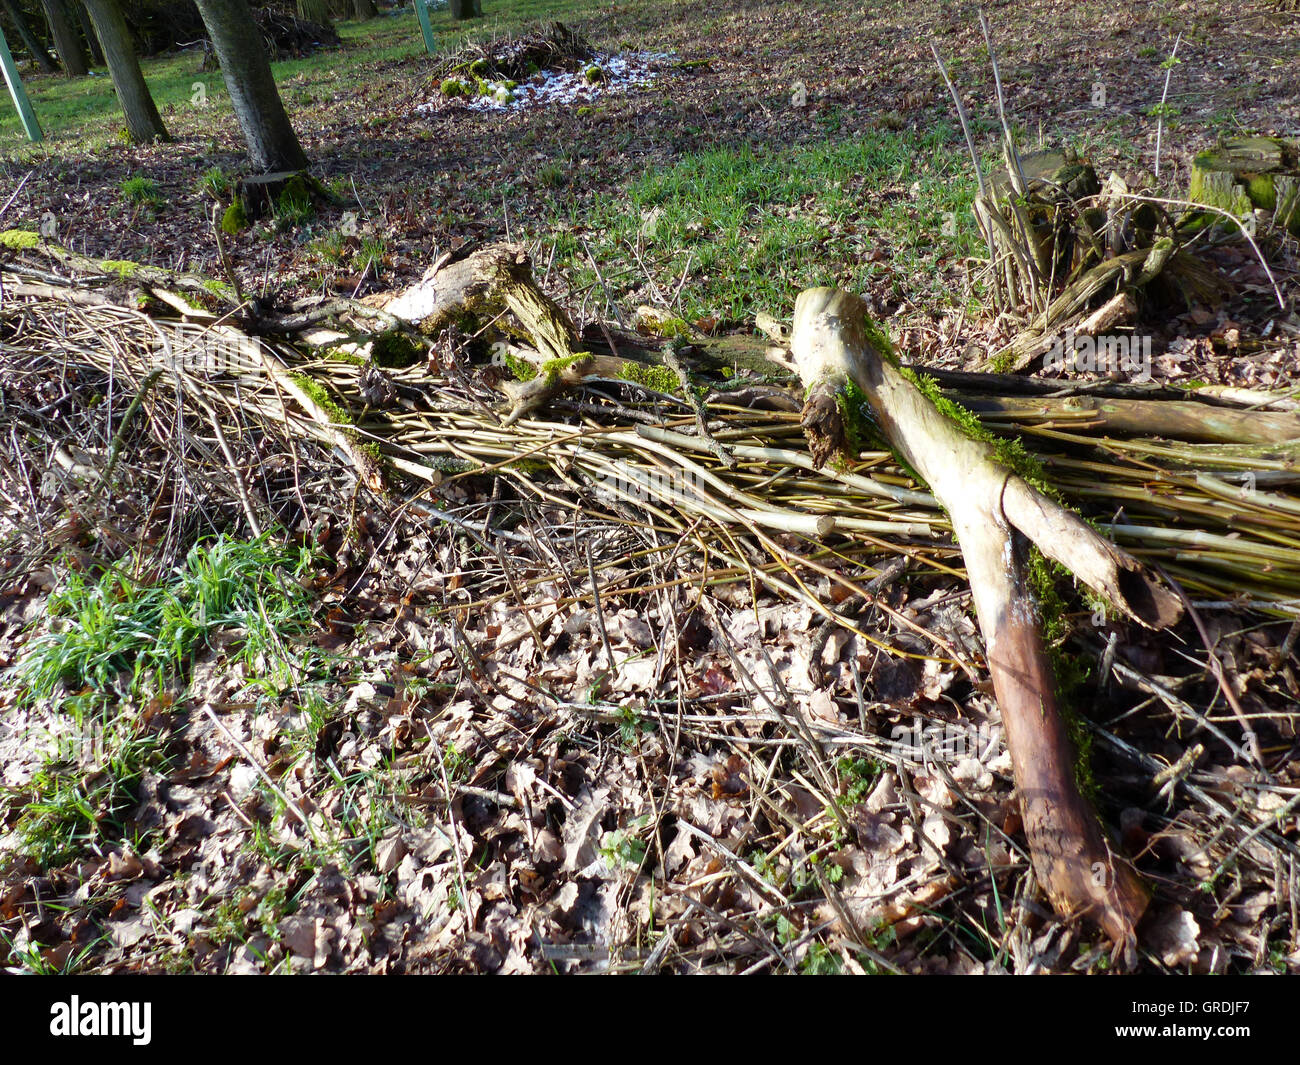 For A Fence, A Wall, Piled Branches And Twigs On The Forest Edge, Brushwood Fence Stock Photo